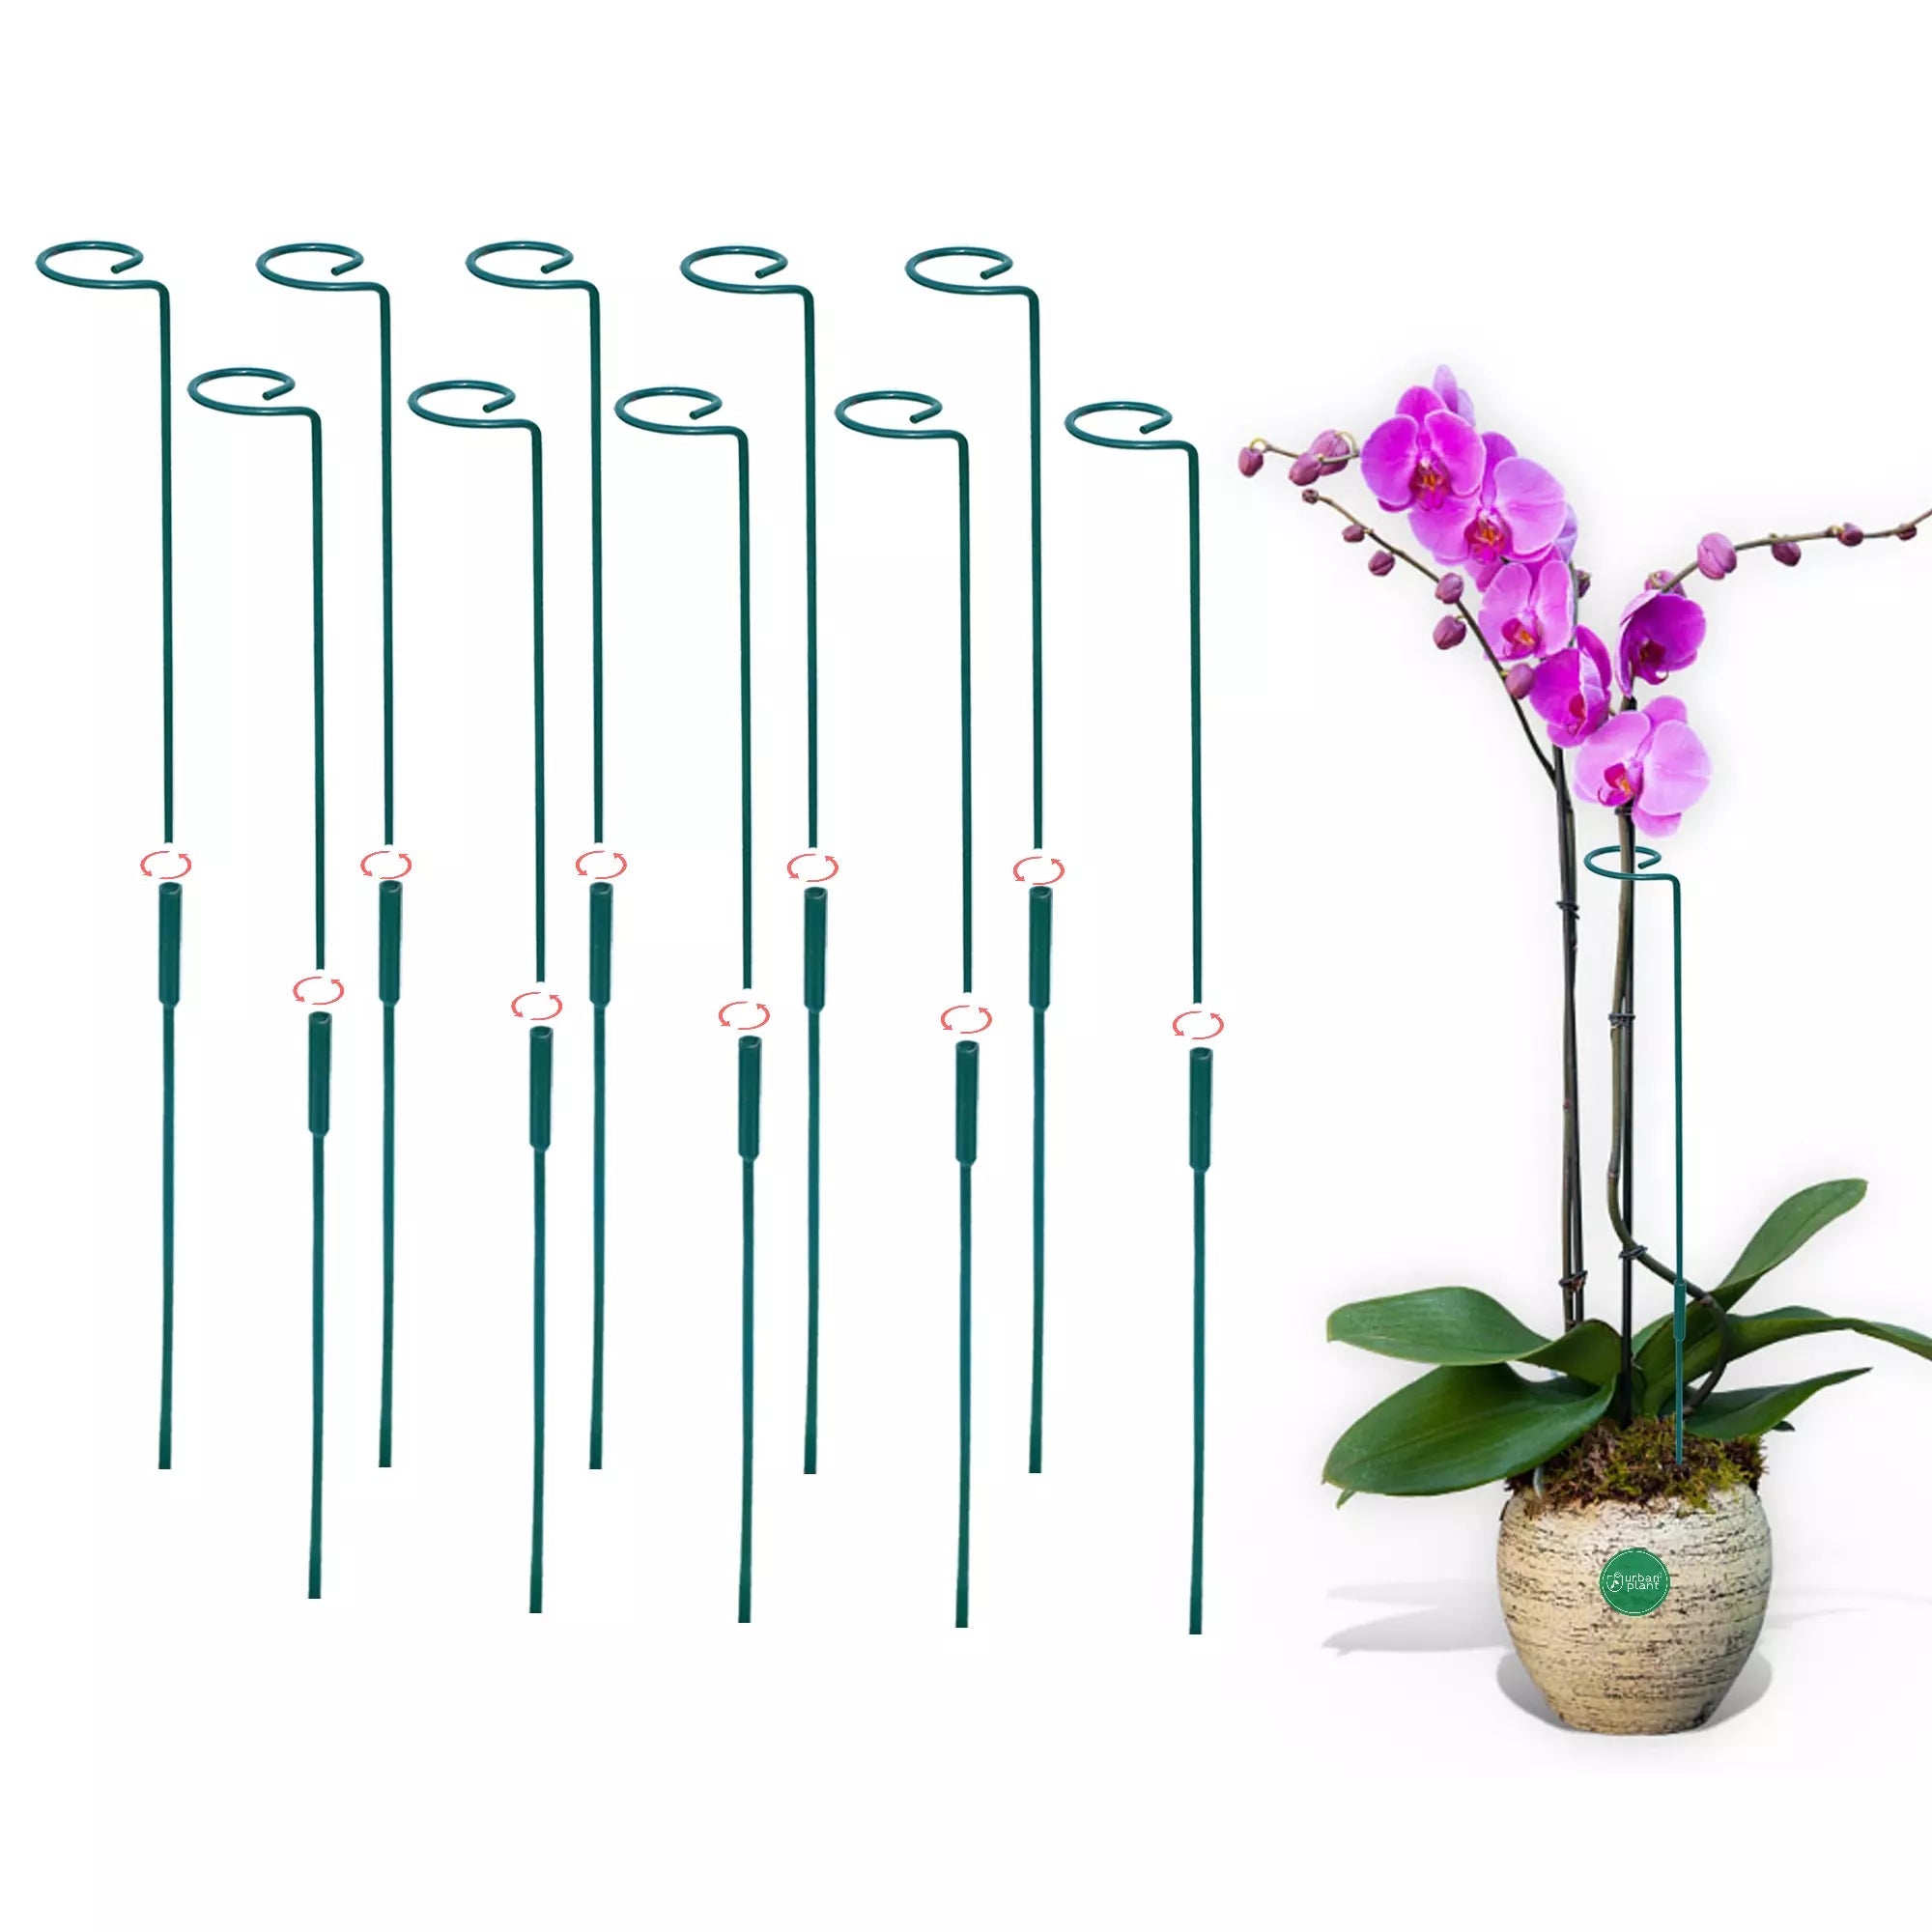 Garden Stakes - Metal Plant Support Sticks Gardening Accessories Urban Plant Pack of 10 32 Inch 